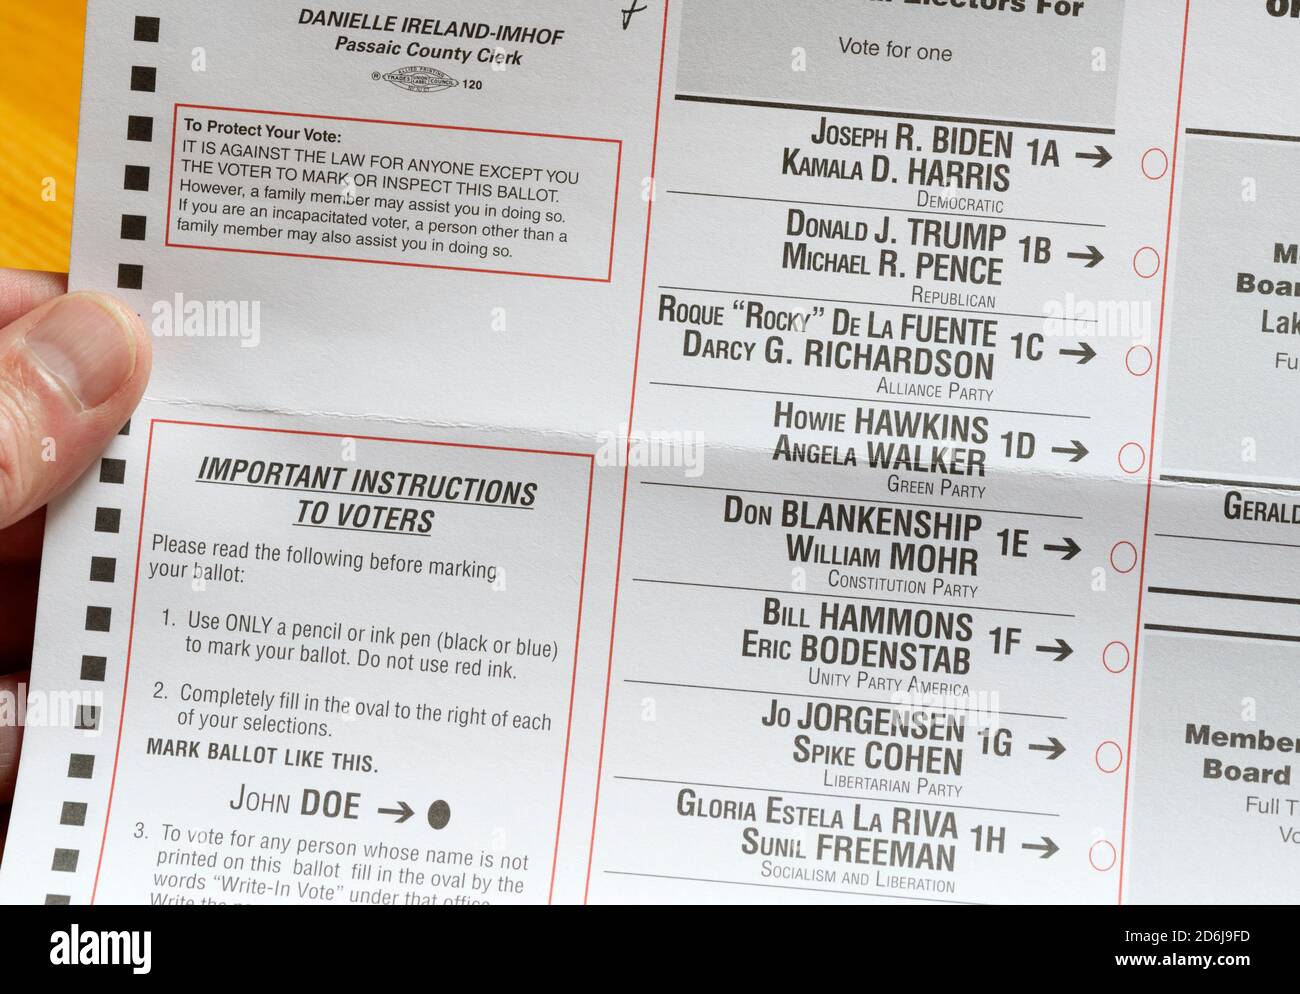 Mail-in ballot, 2020 presidential election United States Stock Photo